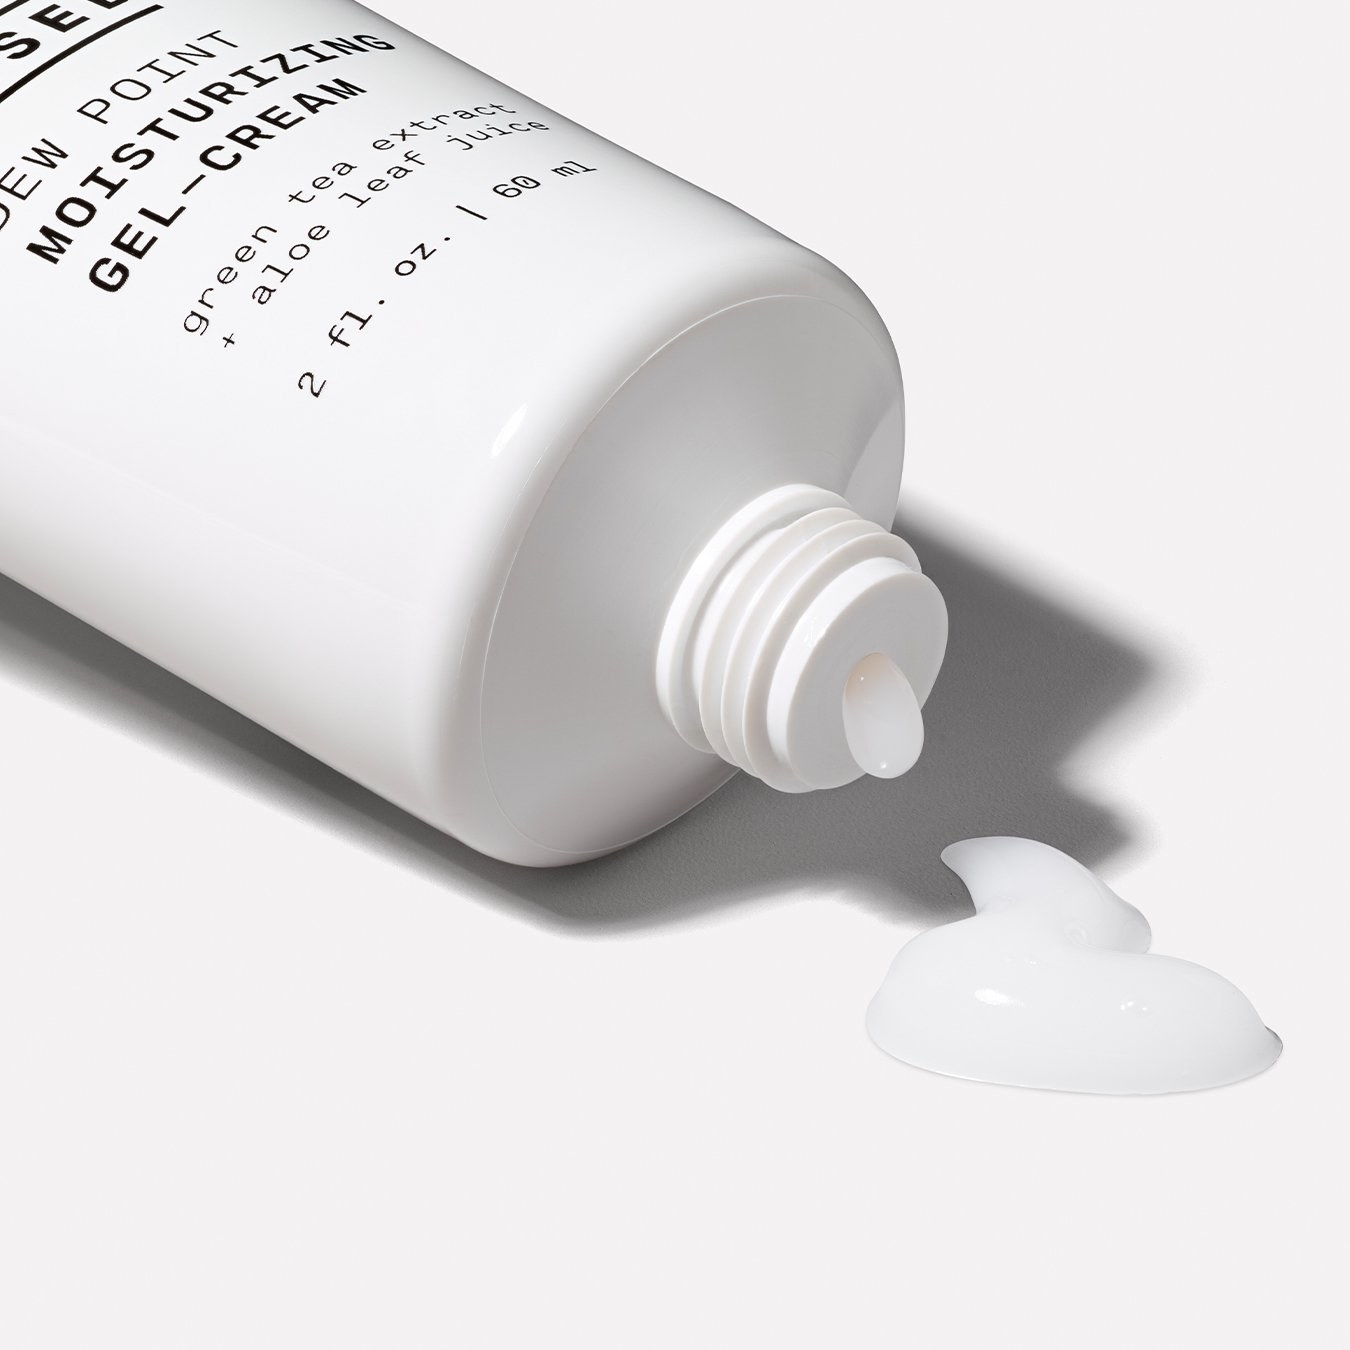 The squeezable bottle of moisturizer